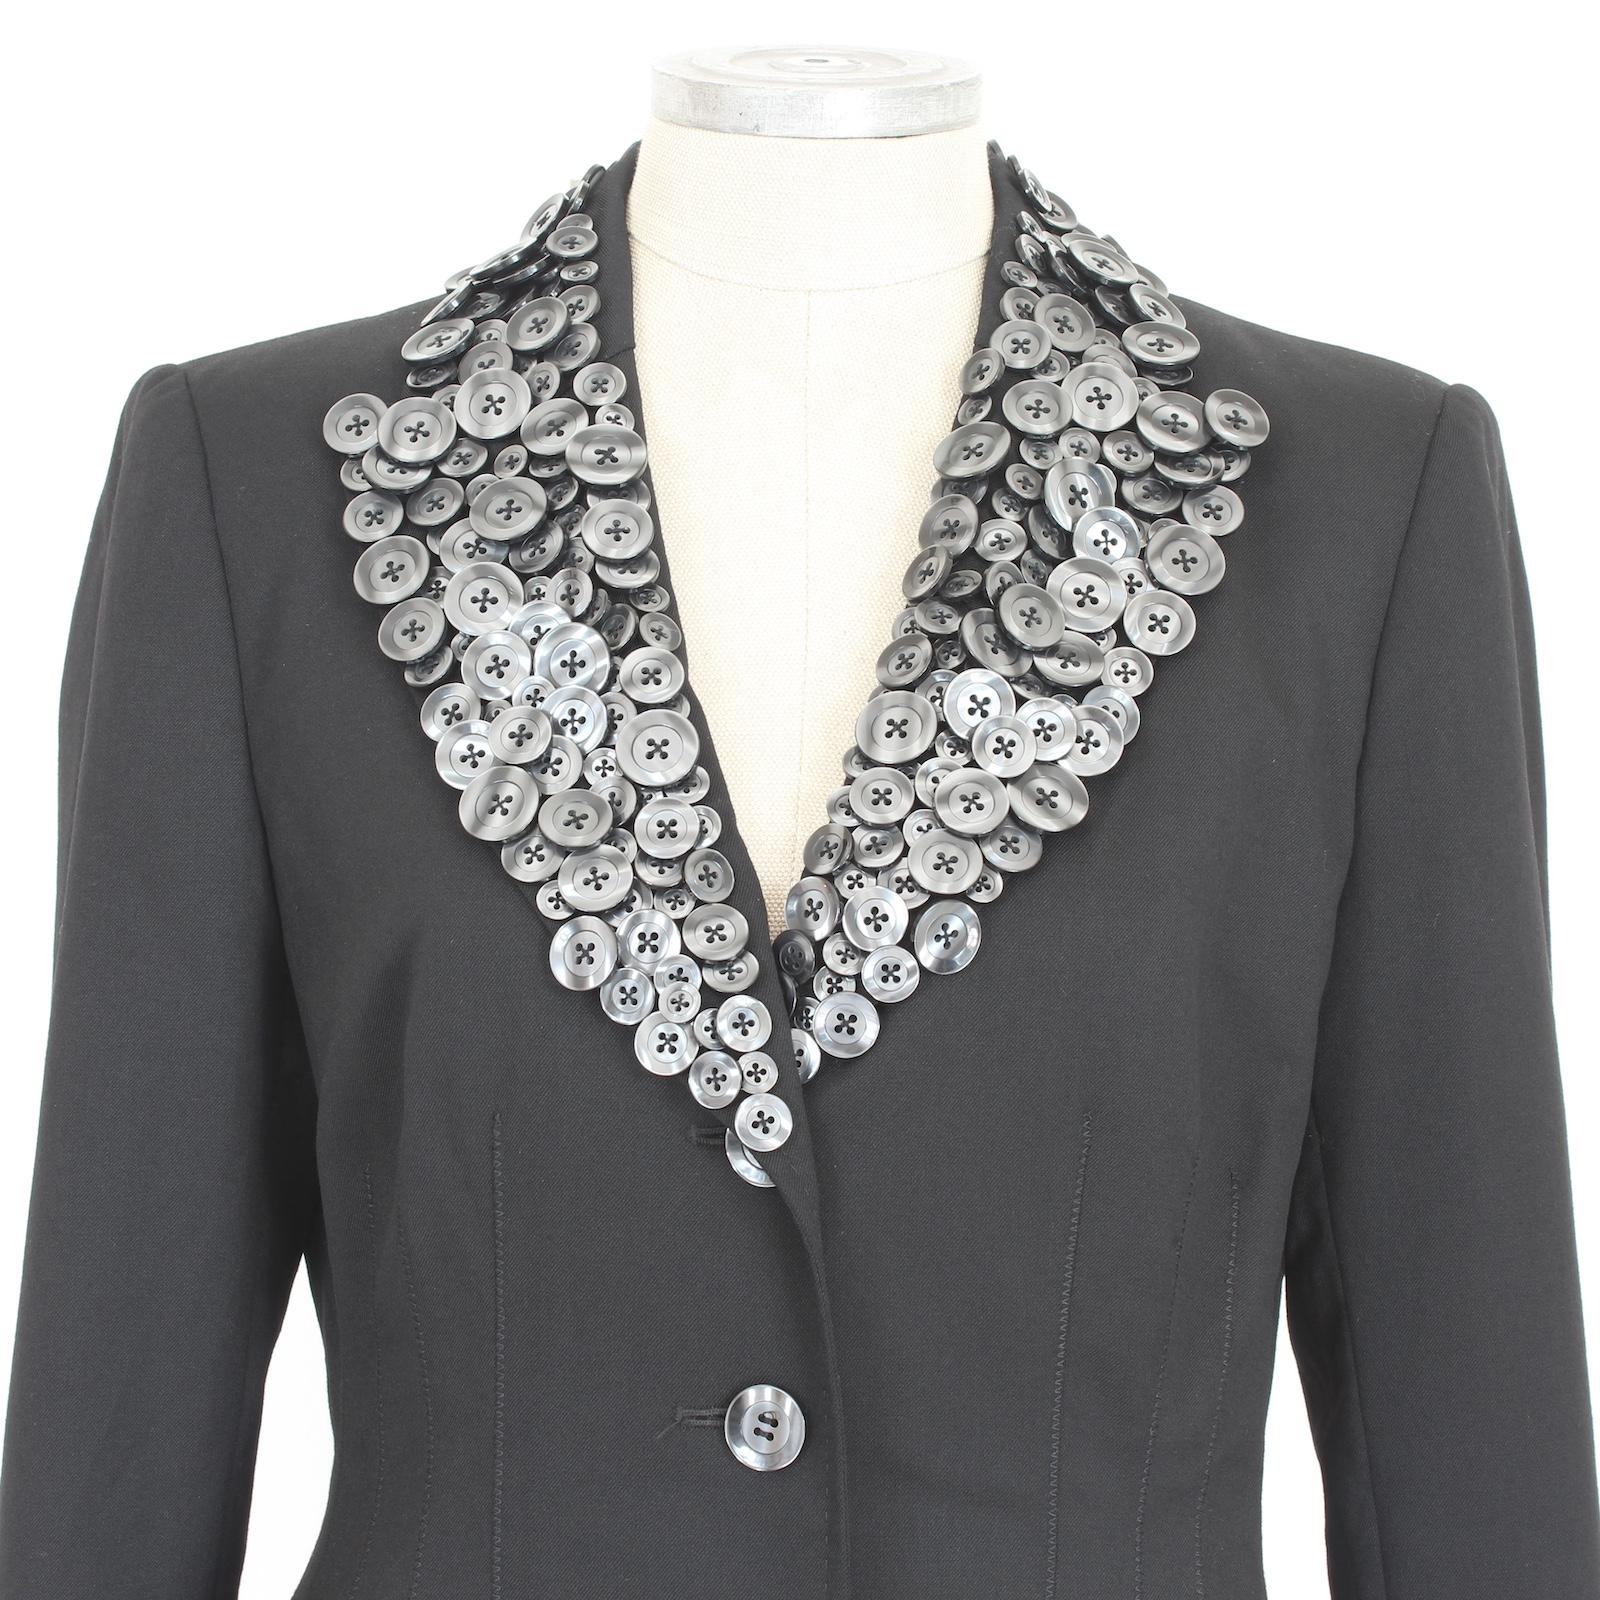 Moschino Cheap and Chic vintage 90s fitted jacket. Black colour, particular reverse covered with black mother-of-pearl buttons. Fabric 99% wool, 1% other fibres. Made in Italy.

Size: 44 IT 10 US 12 UK

Shoulder: 44 cm
Bust/Chest: 46 cm
Waist: 41